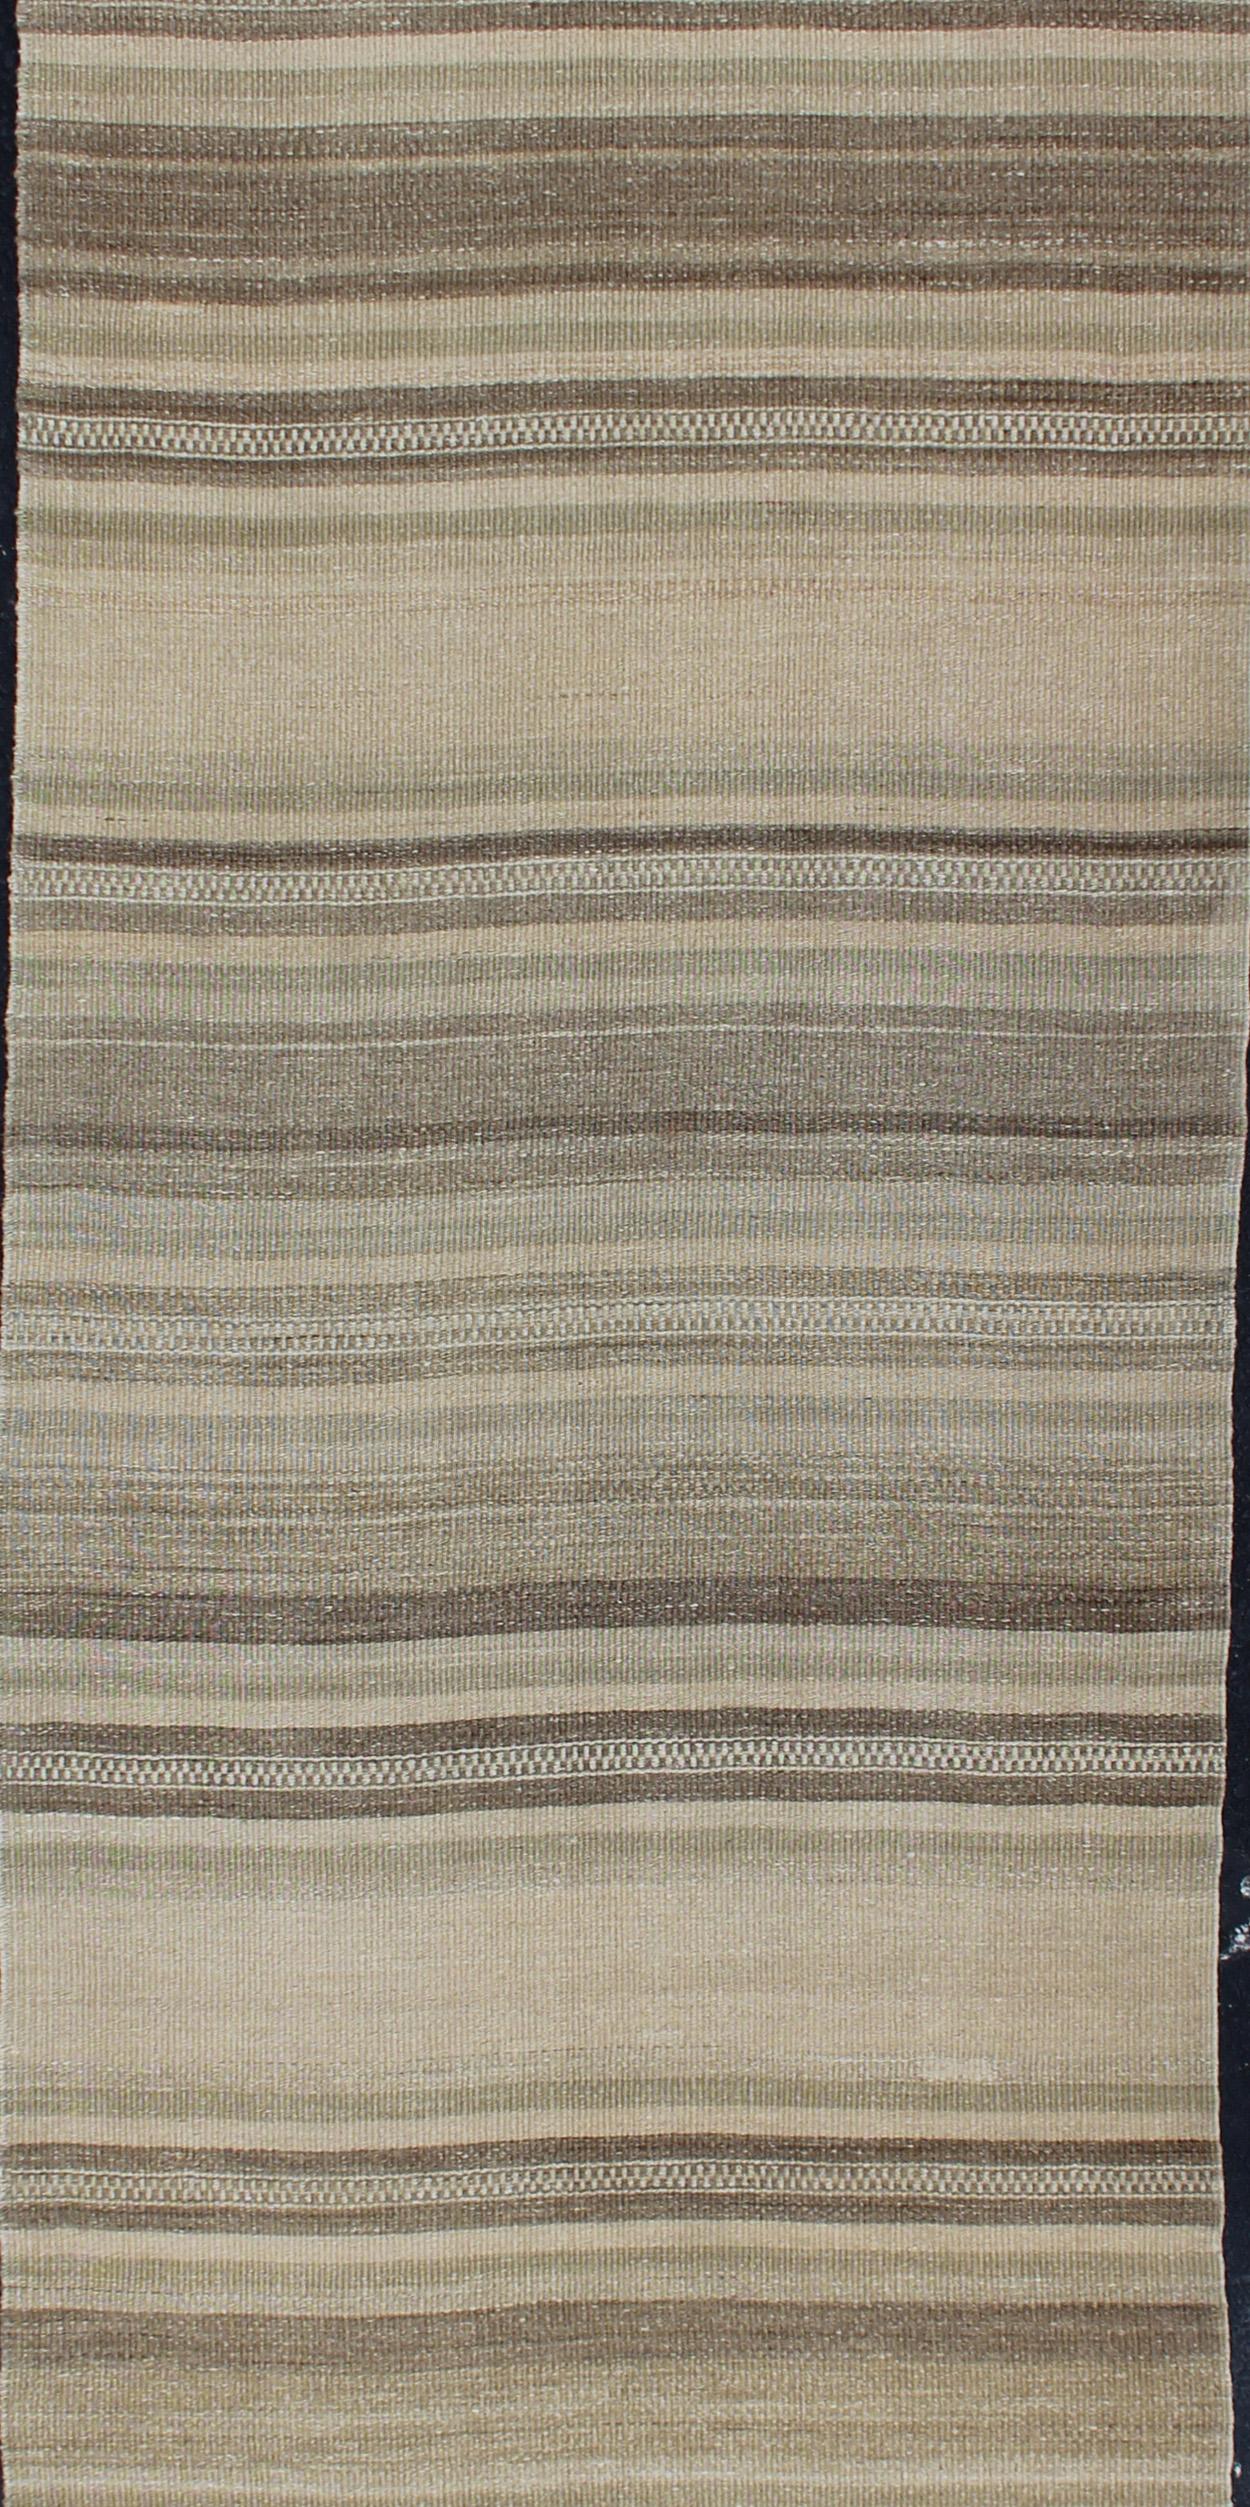 Hand-Woven Striped Vintage Turkish Flat-Weave Runner with Tans, Brown and Olive Green For Sale